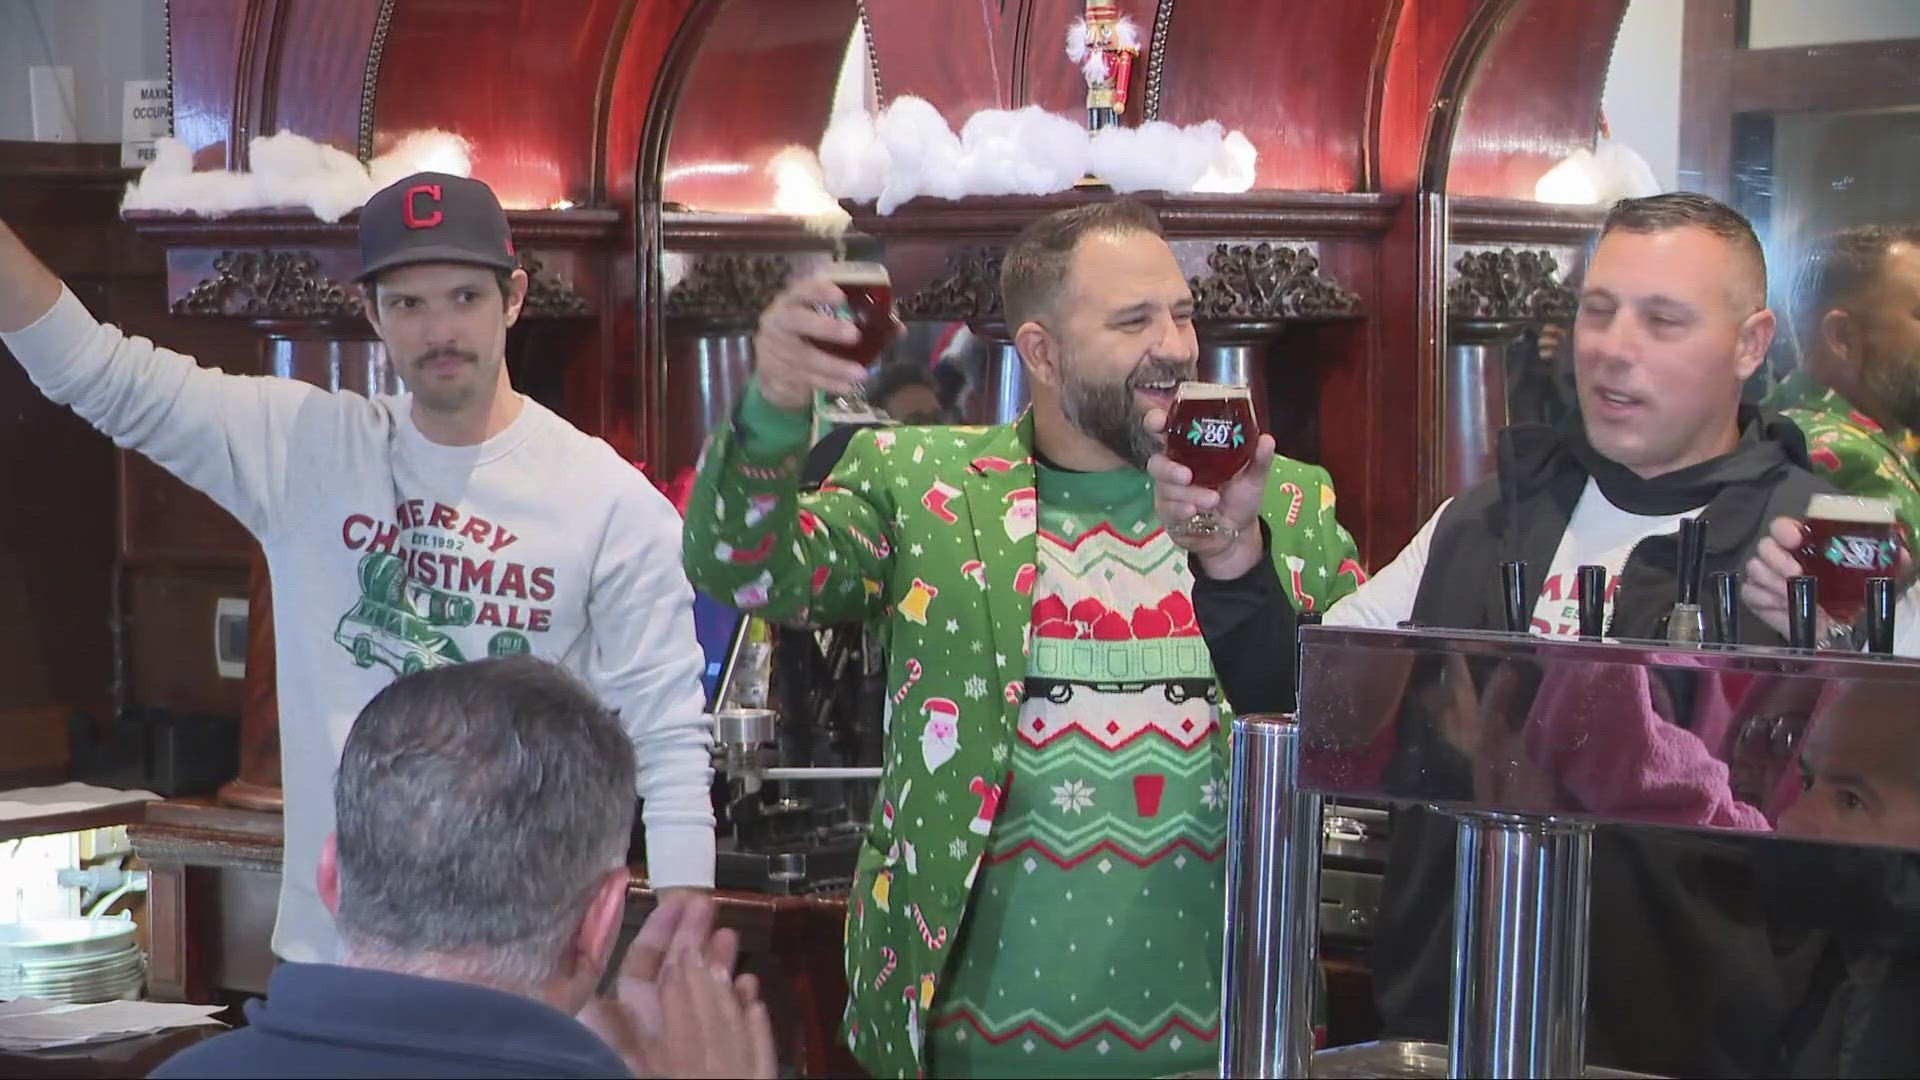 This year, Great Lakes Brewing Company also announced that they will be releasing a new seasonal Cookie Exchange Milk Stoute and Holiday Pack.